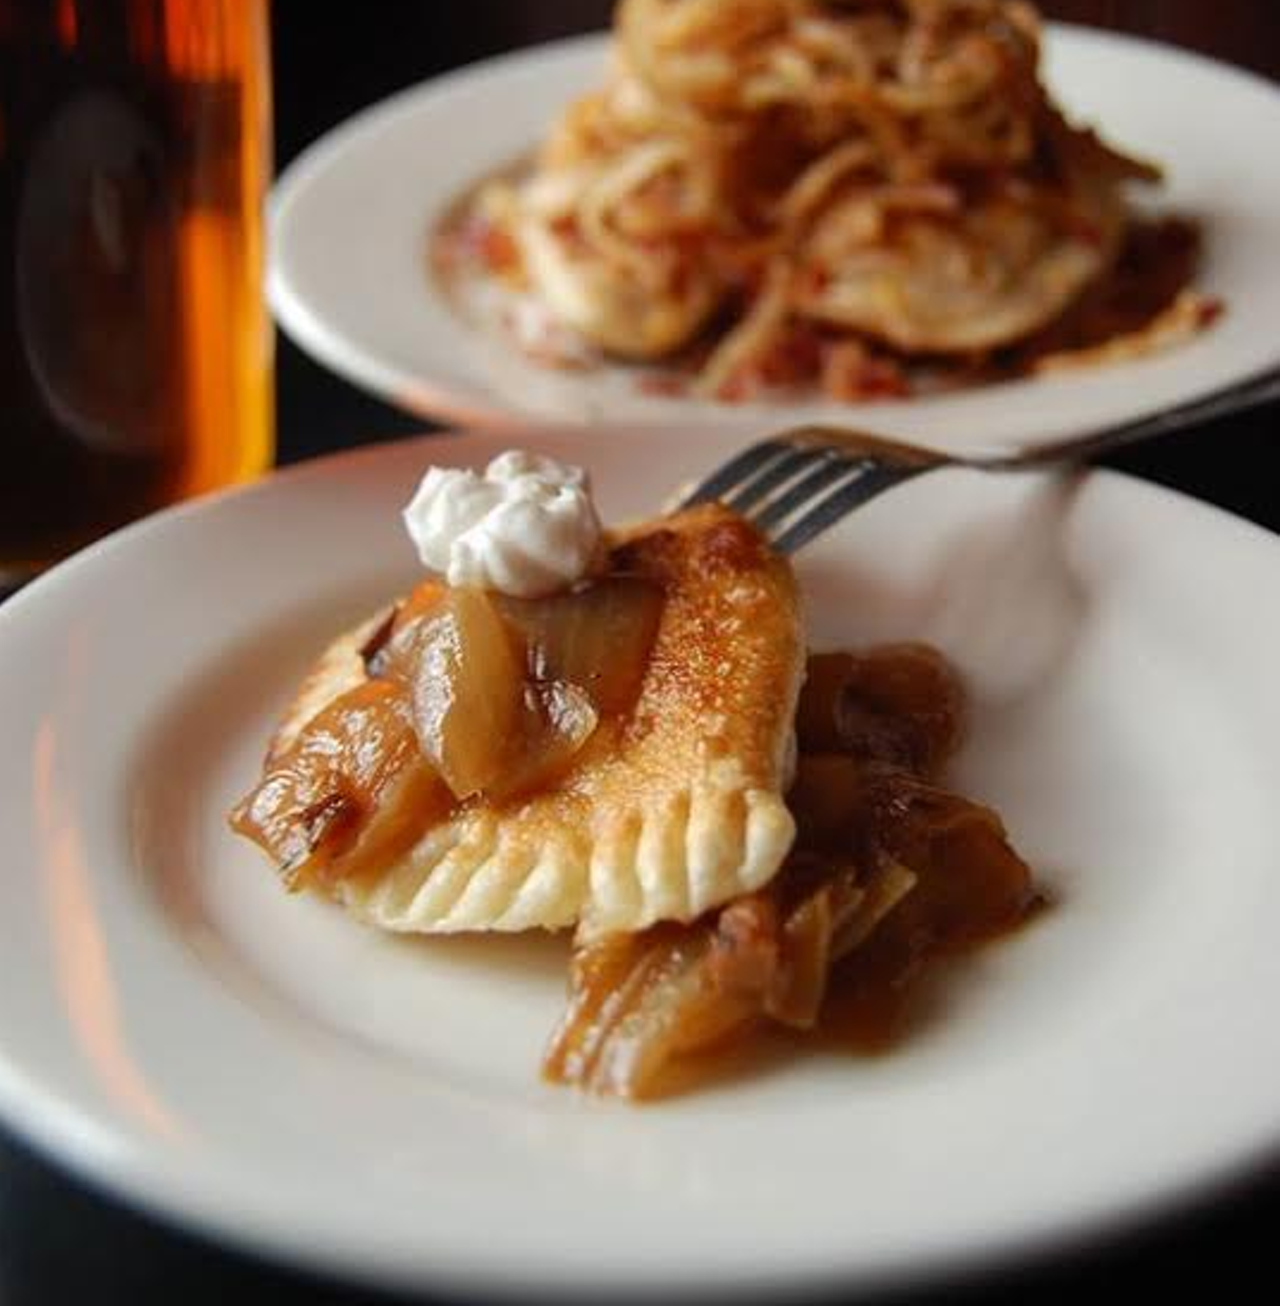 Made the traditional way, Prosperity's pierogies are stuffed with dry ricotta and topped with sauteed onions and melted cheese. Give them a try at Prosperity Social Club
1109 Starkweather Dr., Tremont, 216.937.1938.